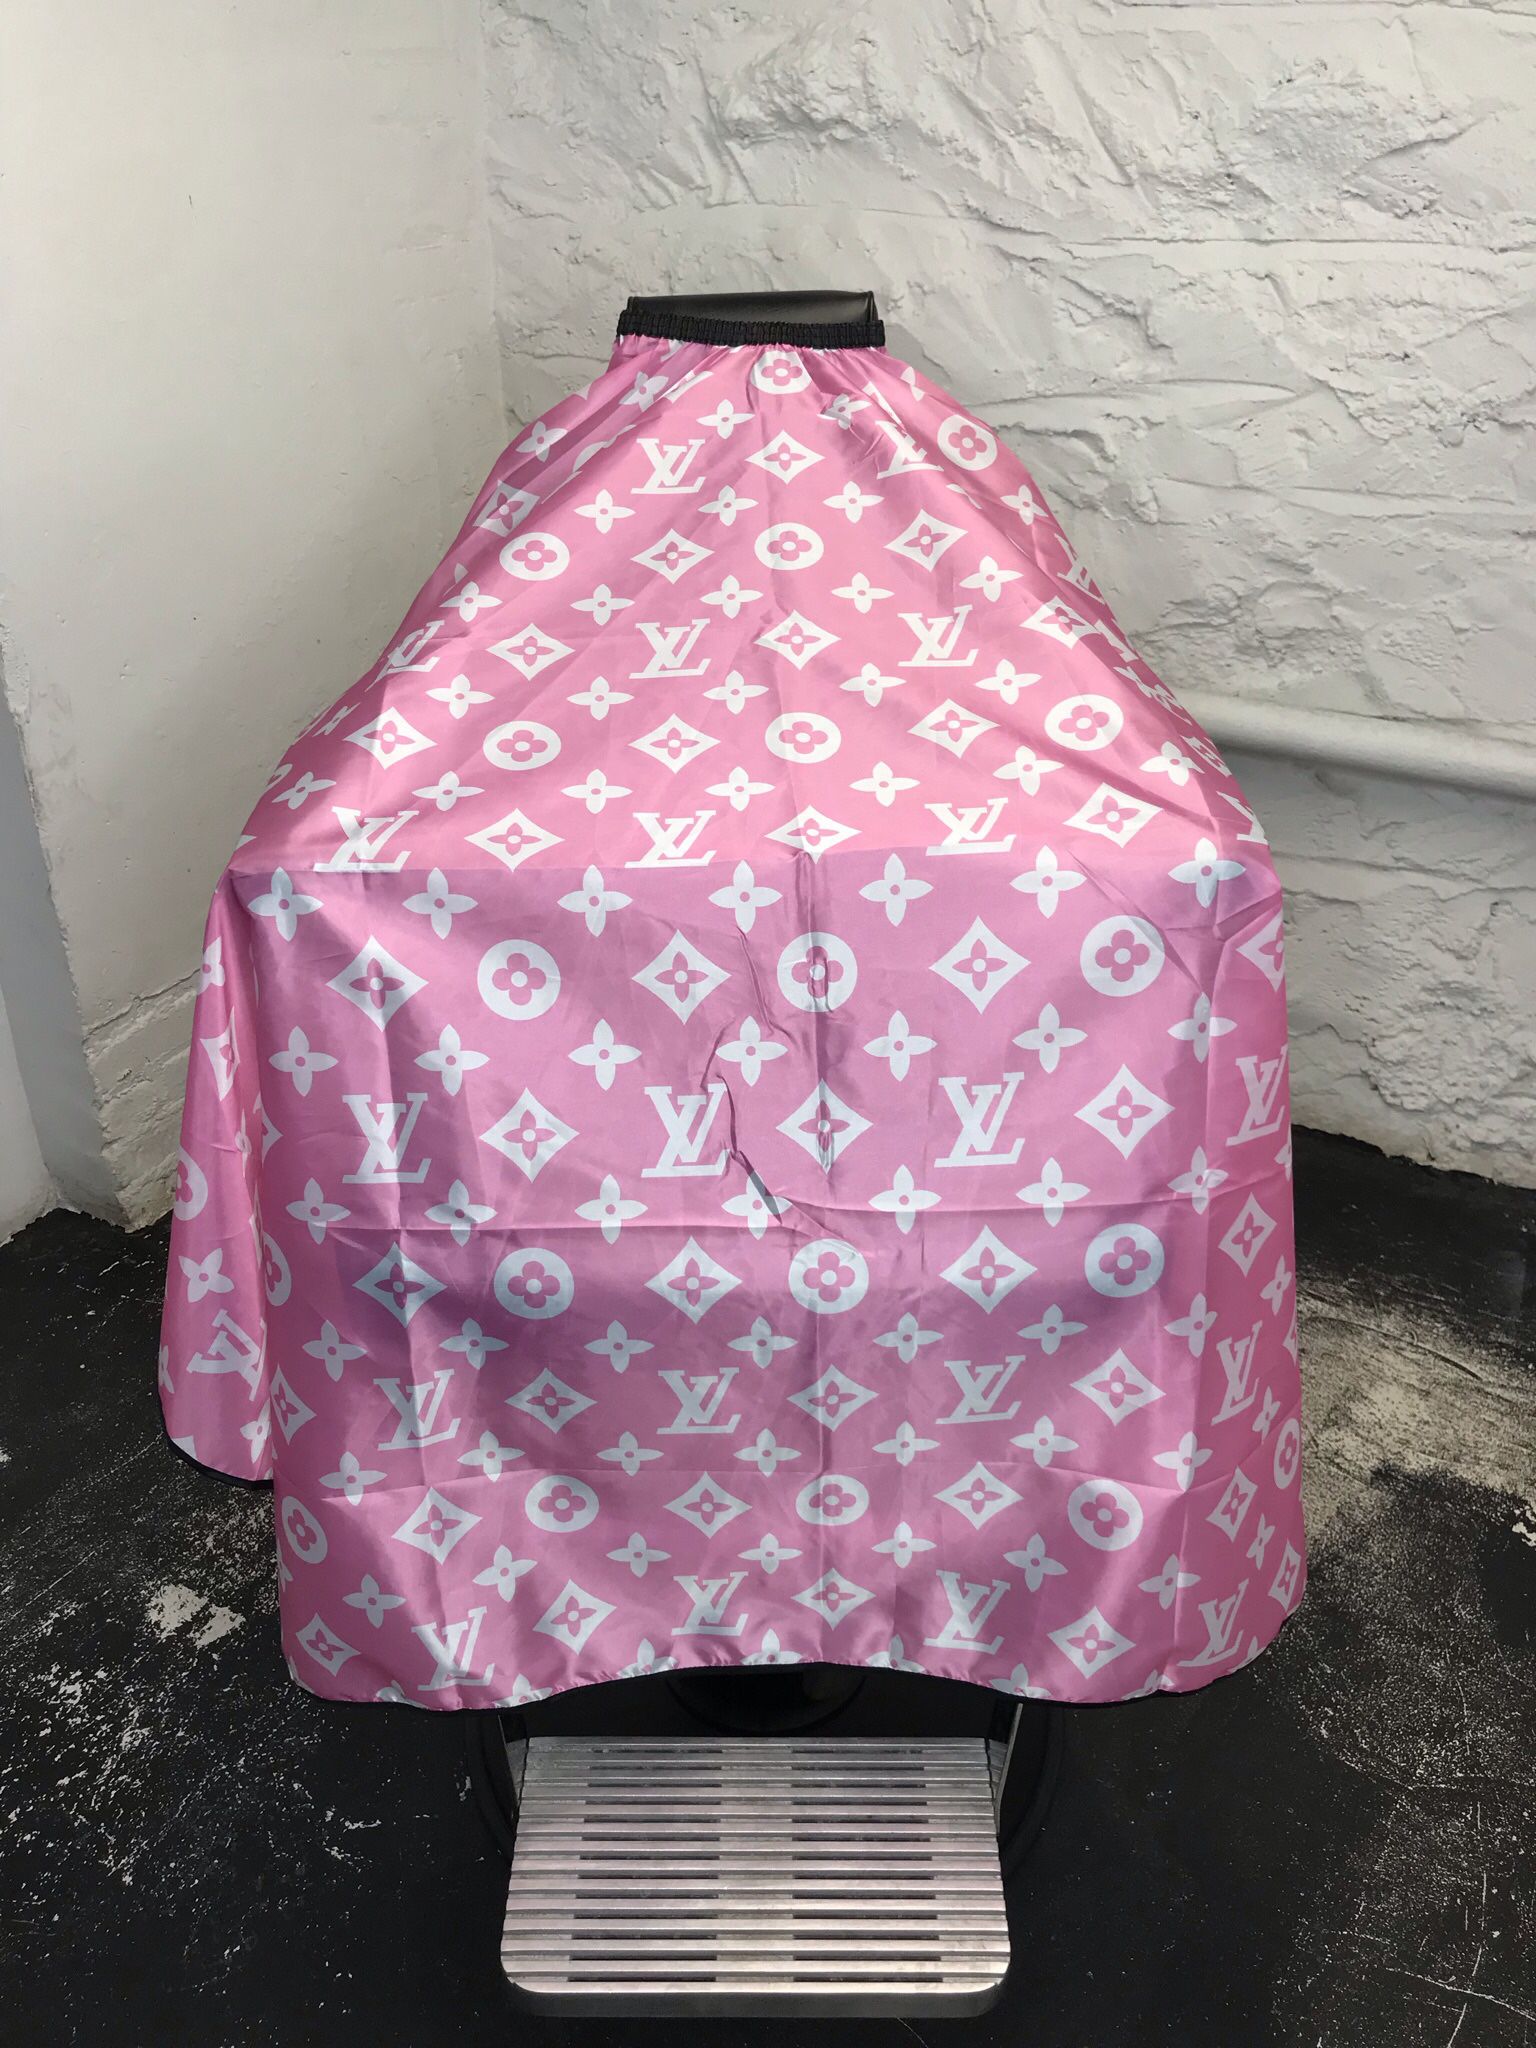 Louis Vuitton Designer Barber and Hairstylist Cape Pink/Black in